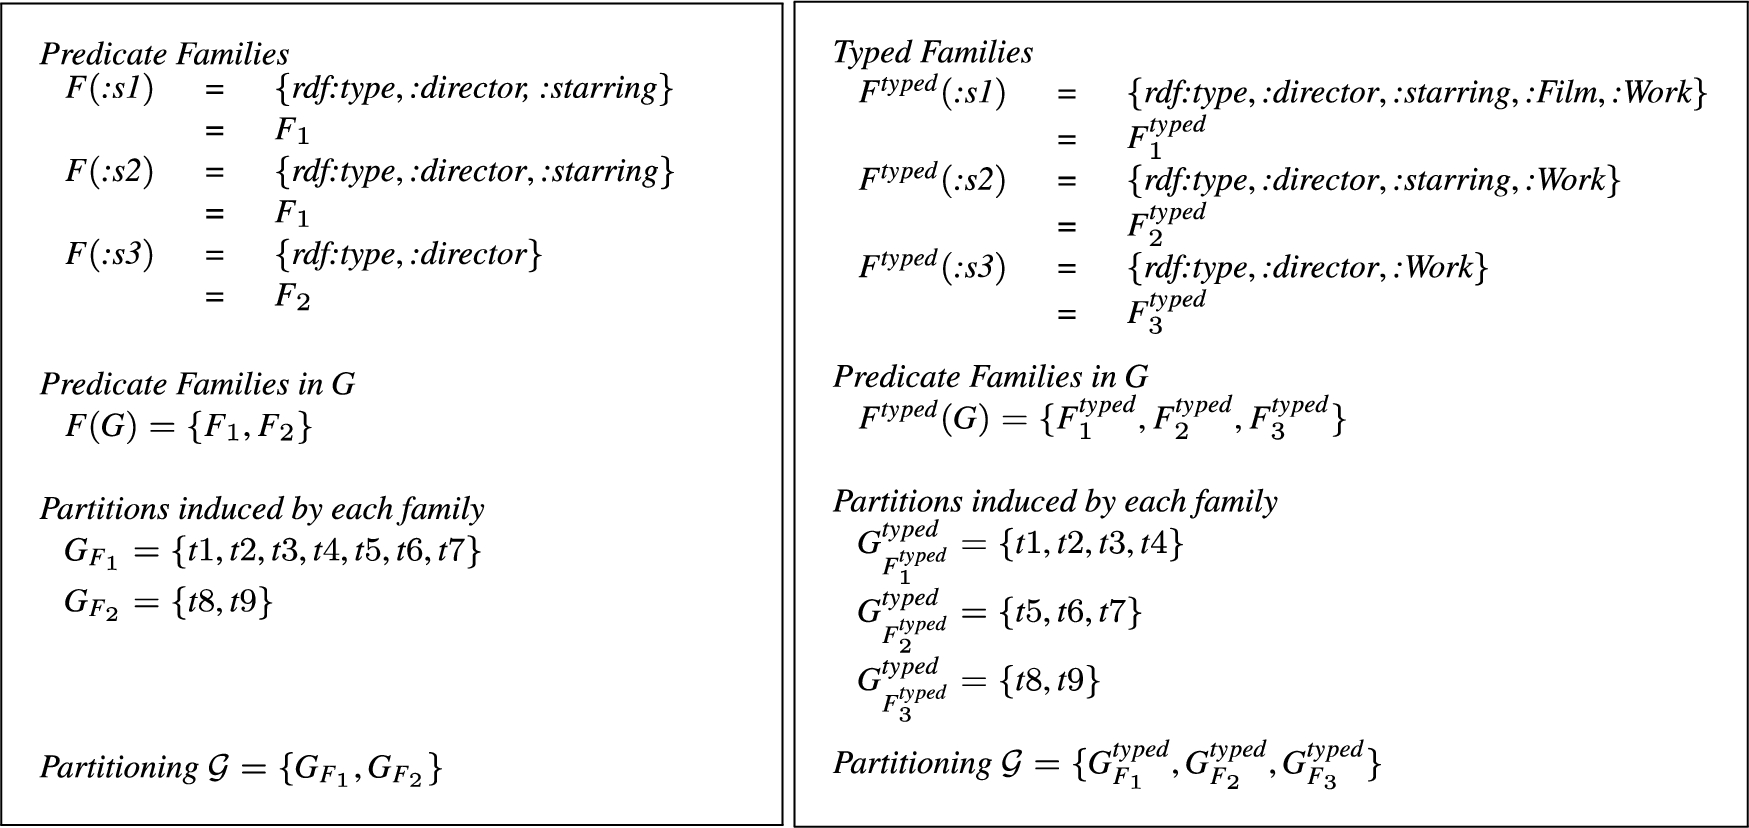 Predicate families and typed families for the KG shown in Fig. 1.